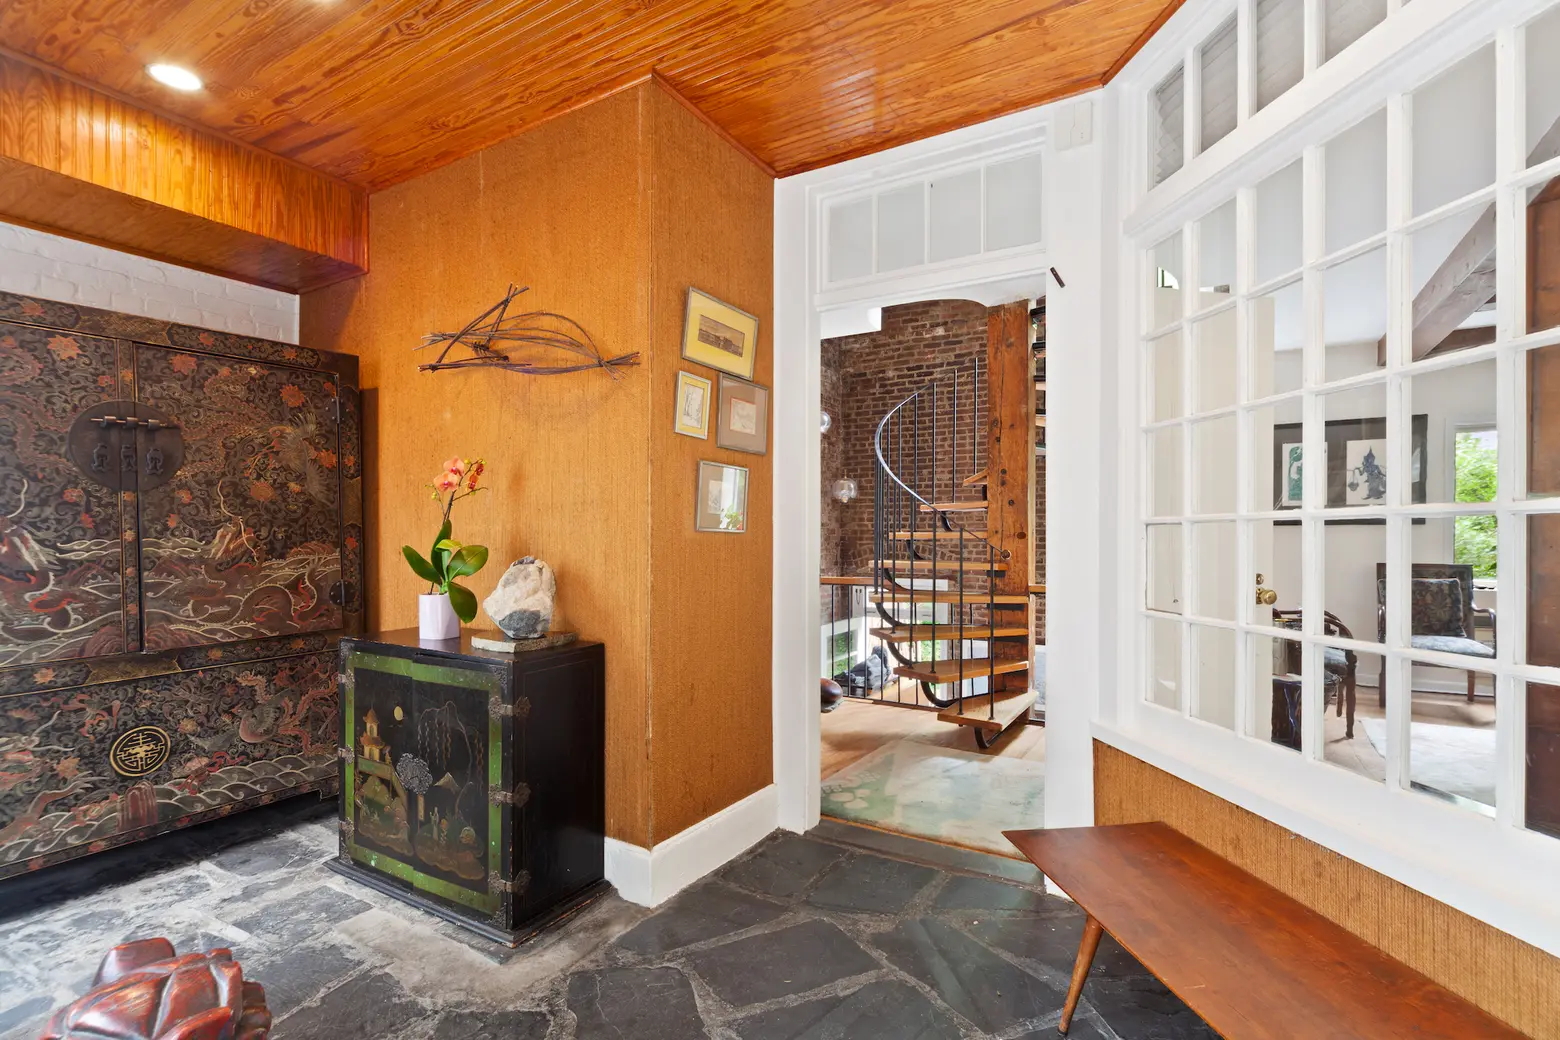 $5.2M Cobble Hill home was built in 1859 as a carriage house and stable